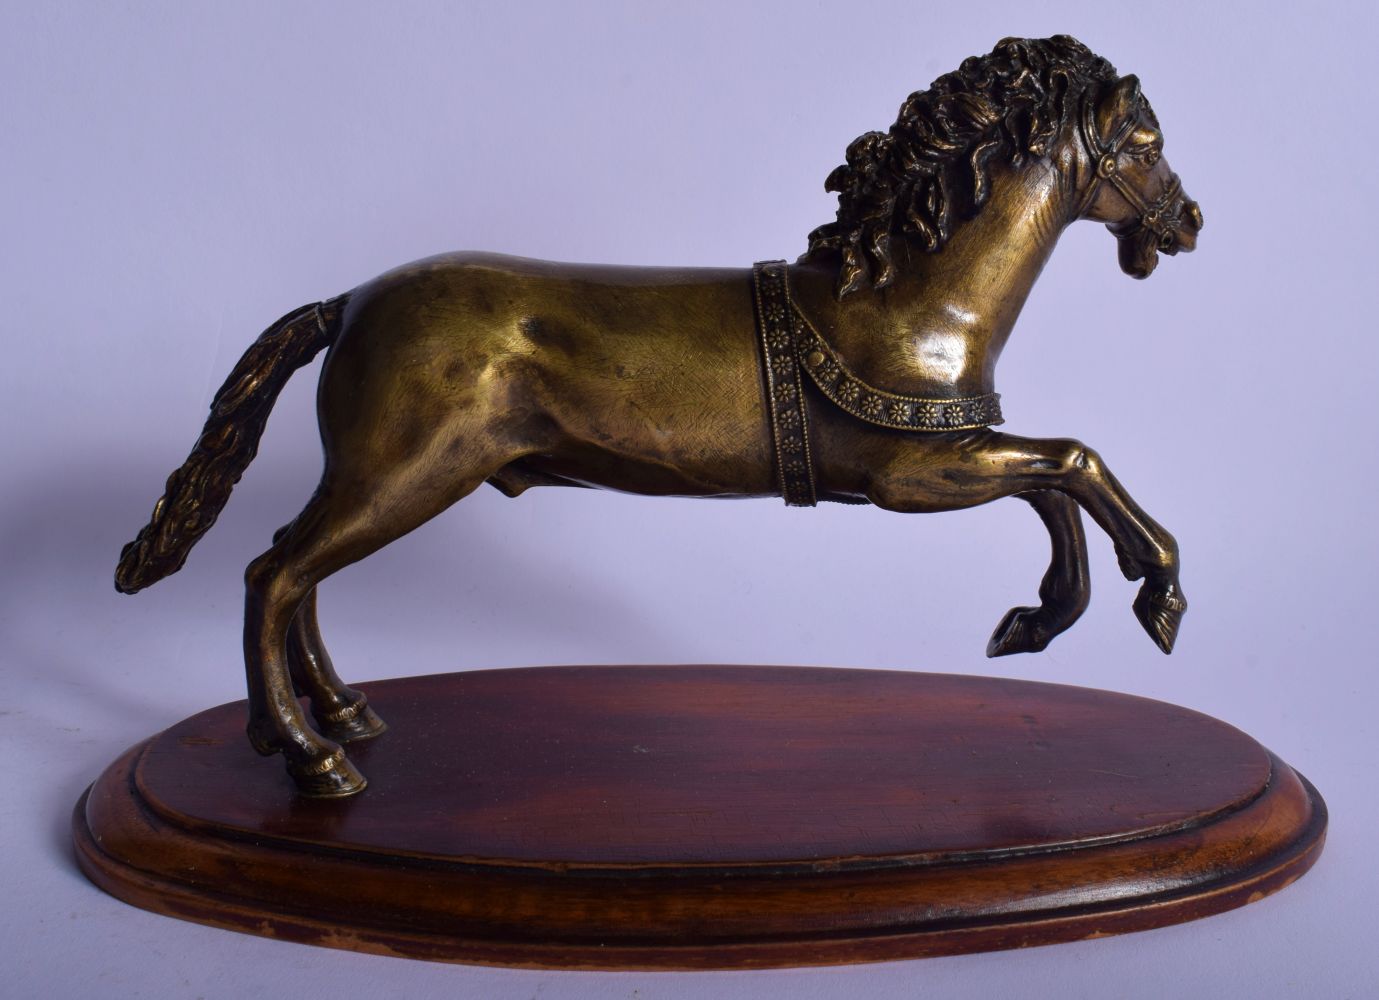 A FINE 18TH CENTURY EUROPEAN BRONZE FIGURE OF A ROAMING HORSE After the Antiquity, modelled leaping - Image 2 of 8